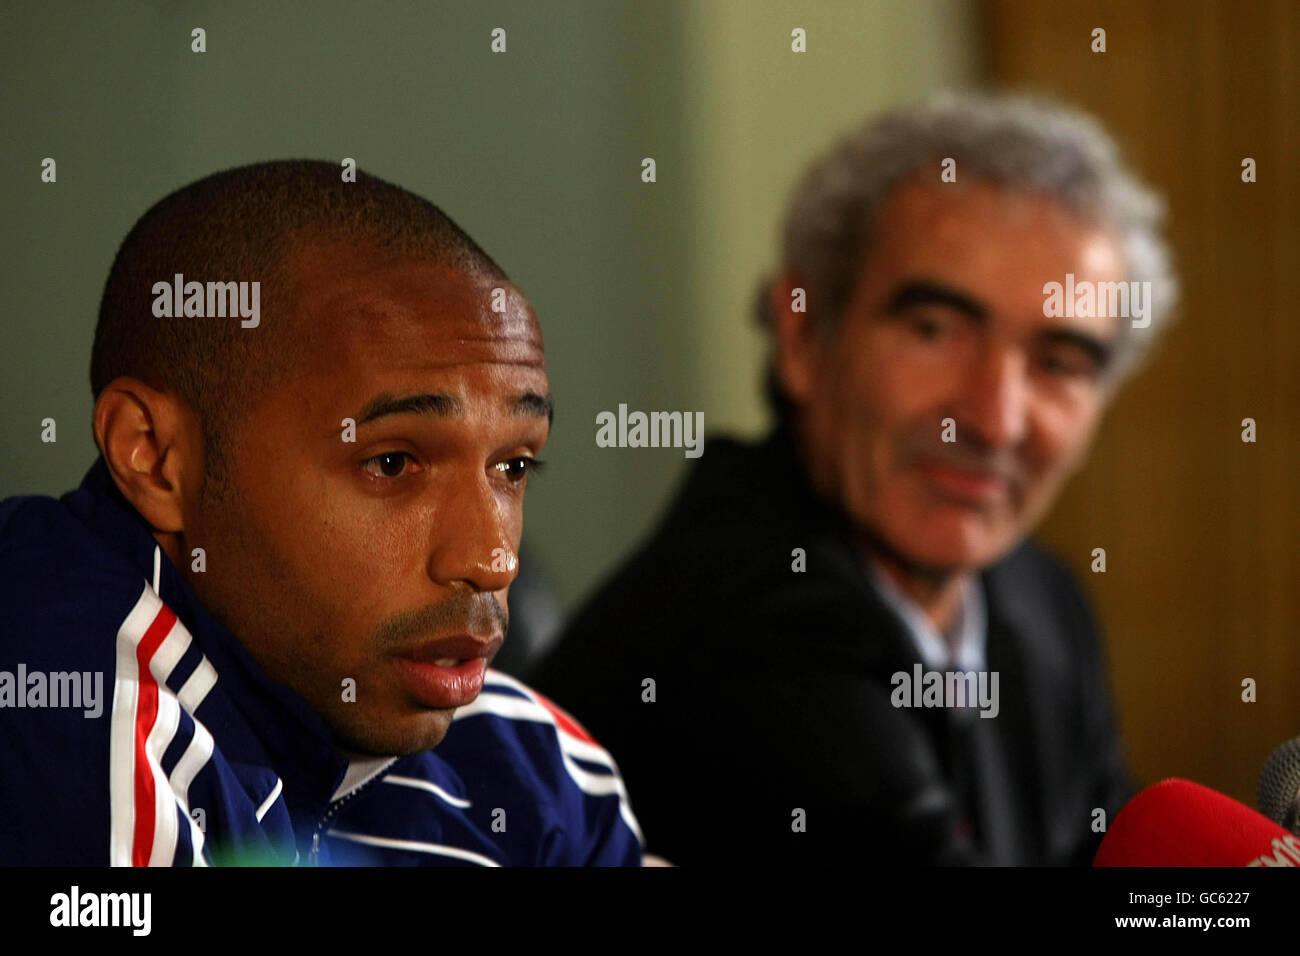 Soccer - France Press Conference - Radisson Airport Hotel. France Manager Raymond Domenech (right) and captain Thierry Henry (left) during a Press Conference at the Radisson Airport Hotel, Dublin. Stock Photo